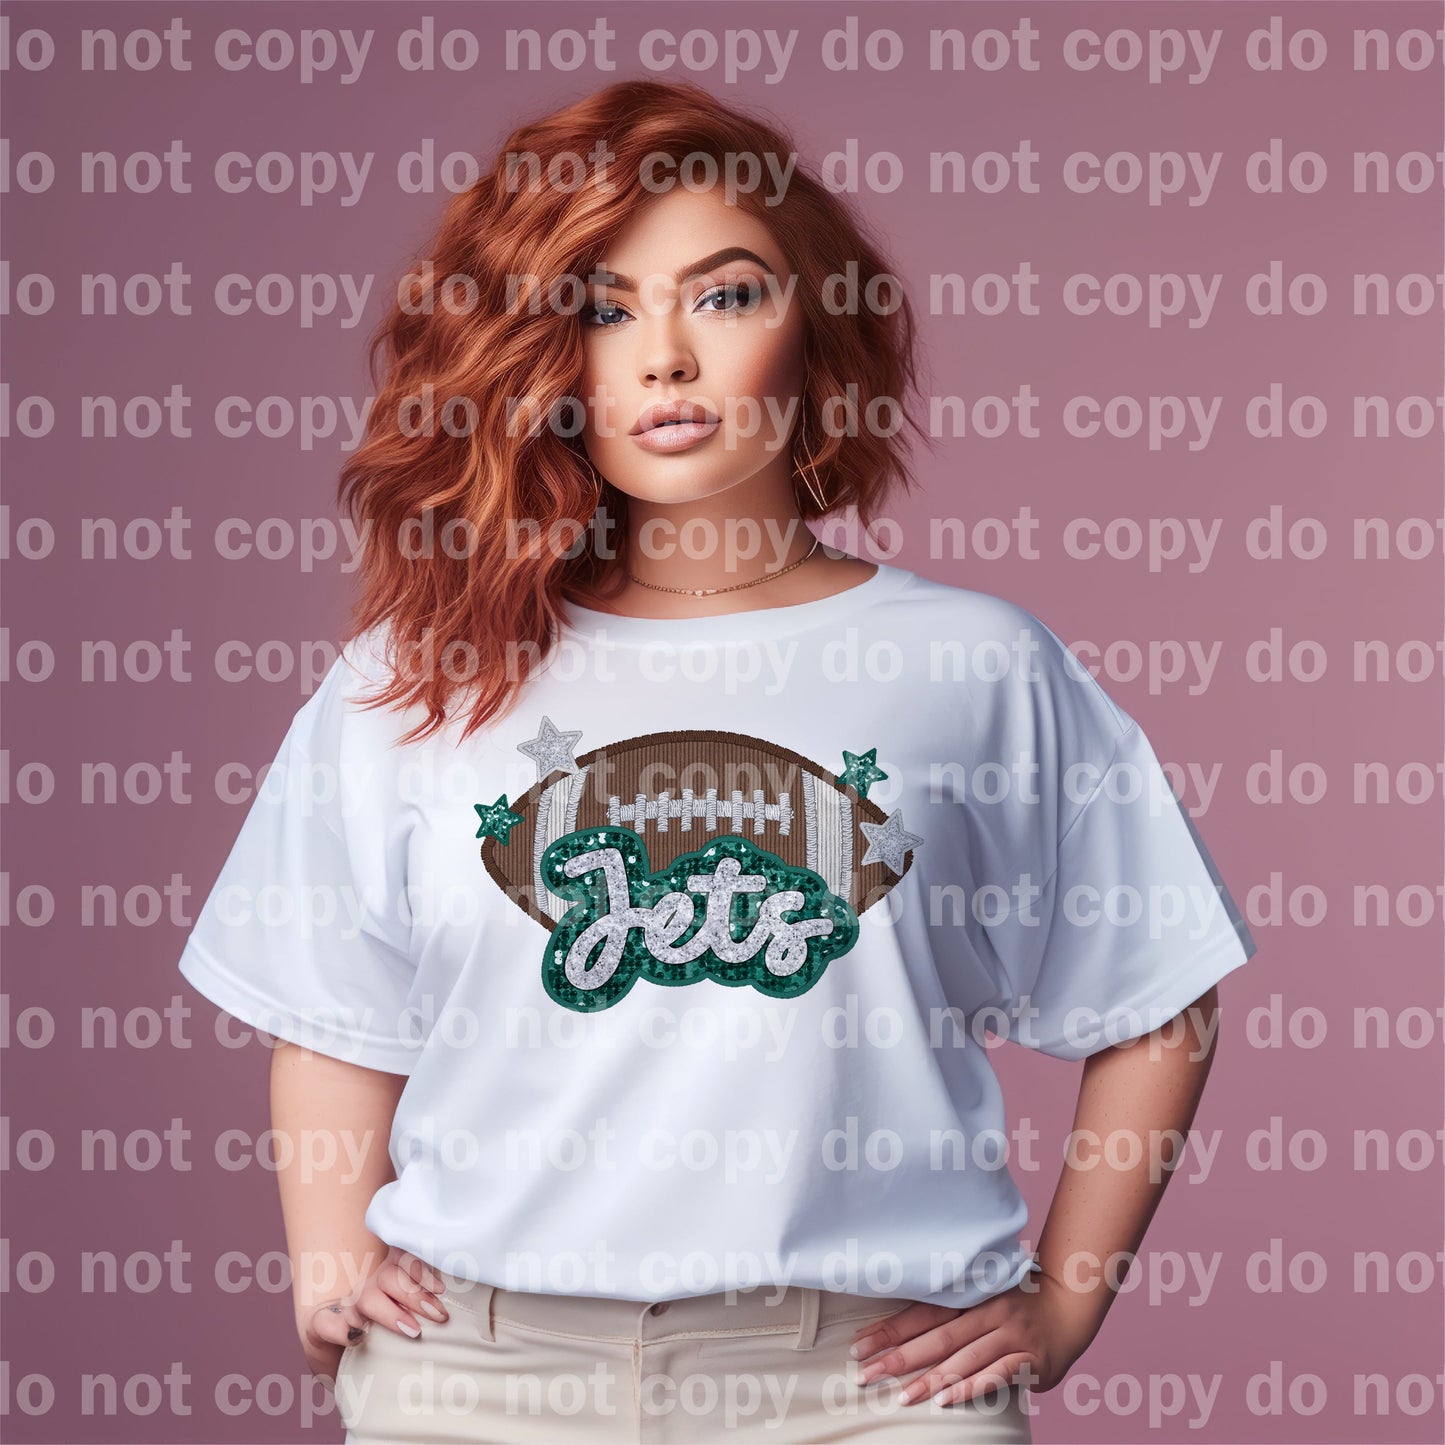 Jets Football Dream Print or Sublimation Print